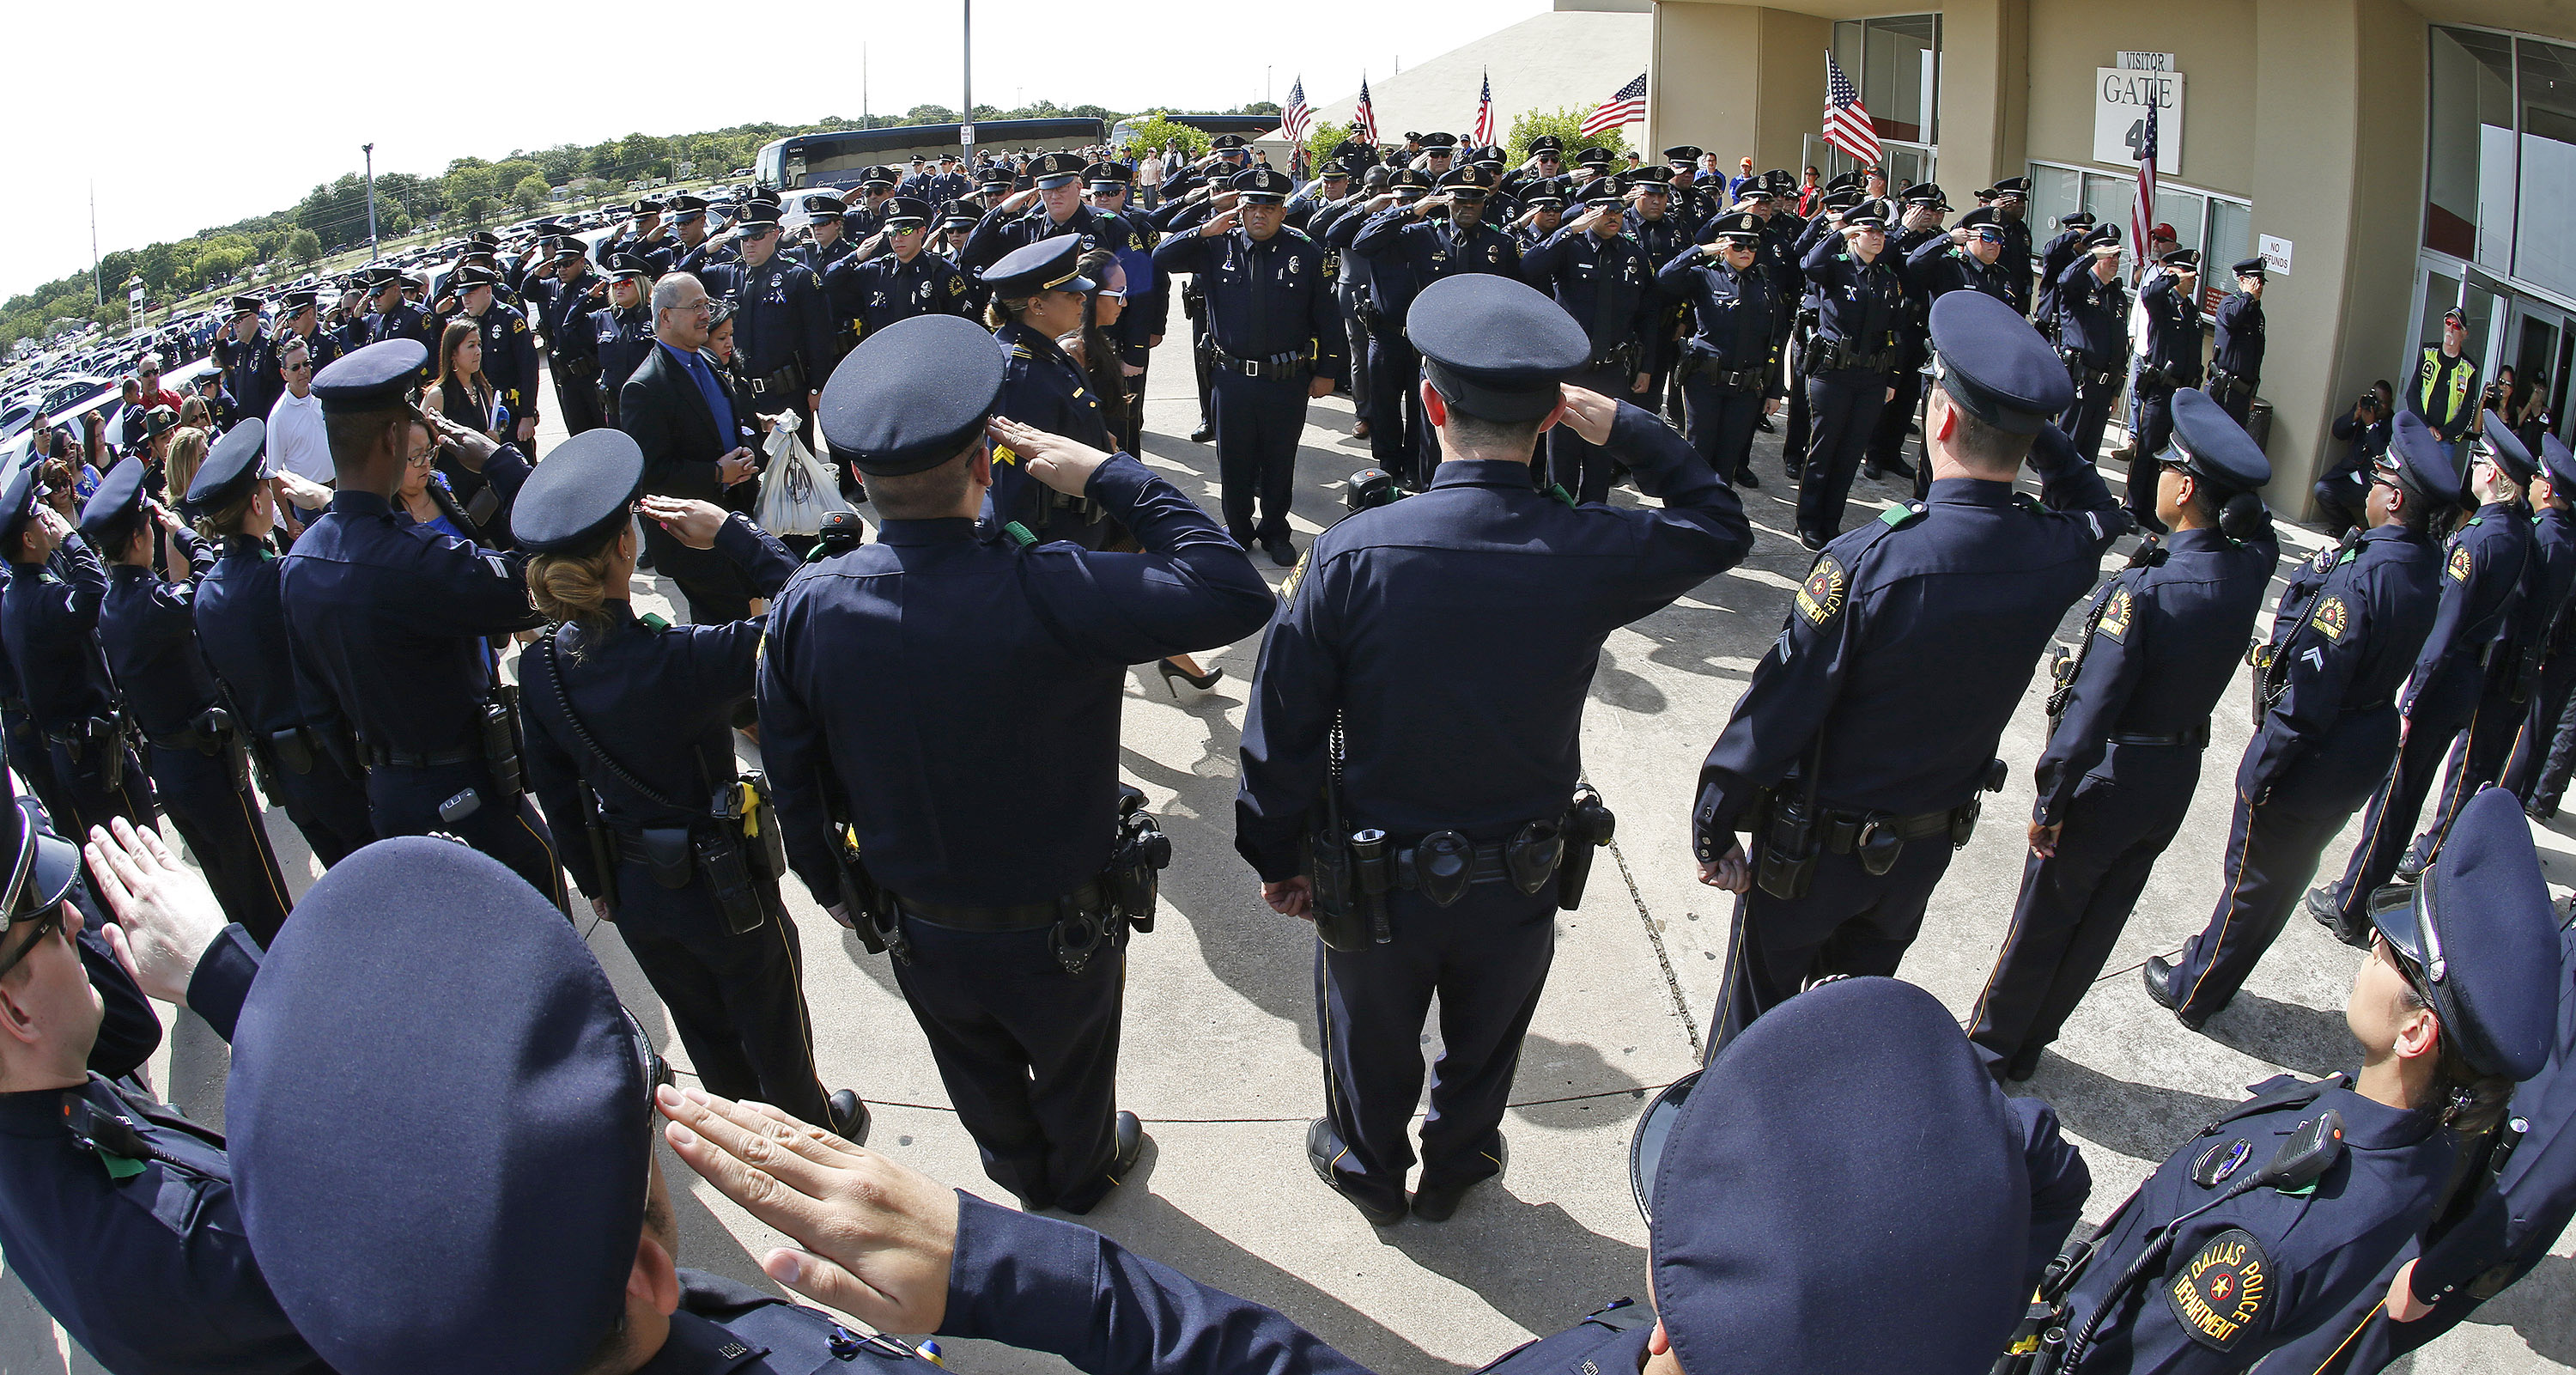 Dallas Police officers salute as family of officer Patrick Zamarippa arrives for his funeral on July 16, 2016. Zamarippa was one of the officers killed during the shooting in Dallas on July 7, 2016. Since, Texas Governor Greg Abbott has proposed that attacking police officers should be classified as a hate crime. (Paul Moseley—Fort Worth Star-Telegram/TNS/Getty Images)